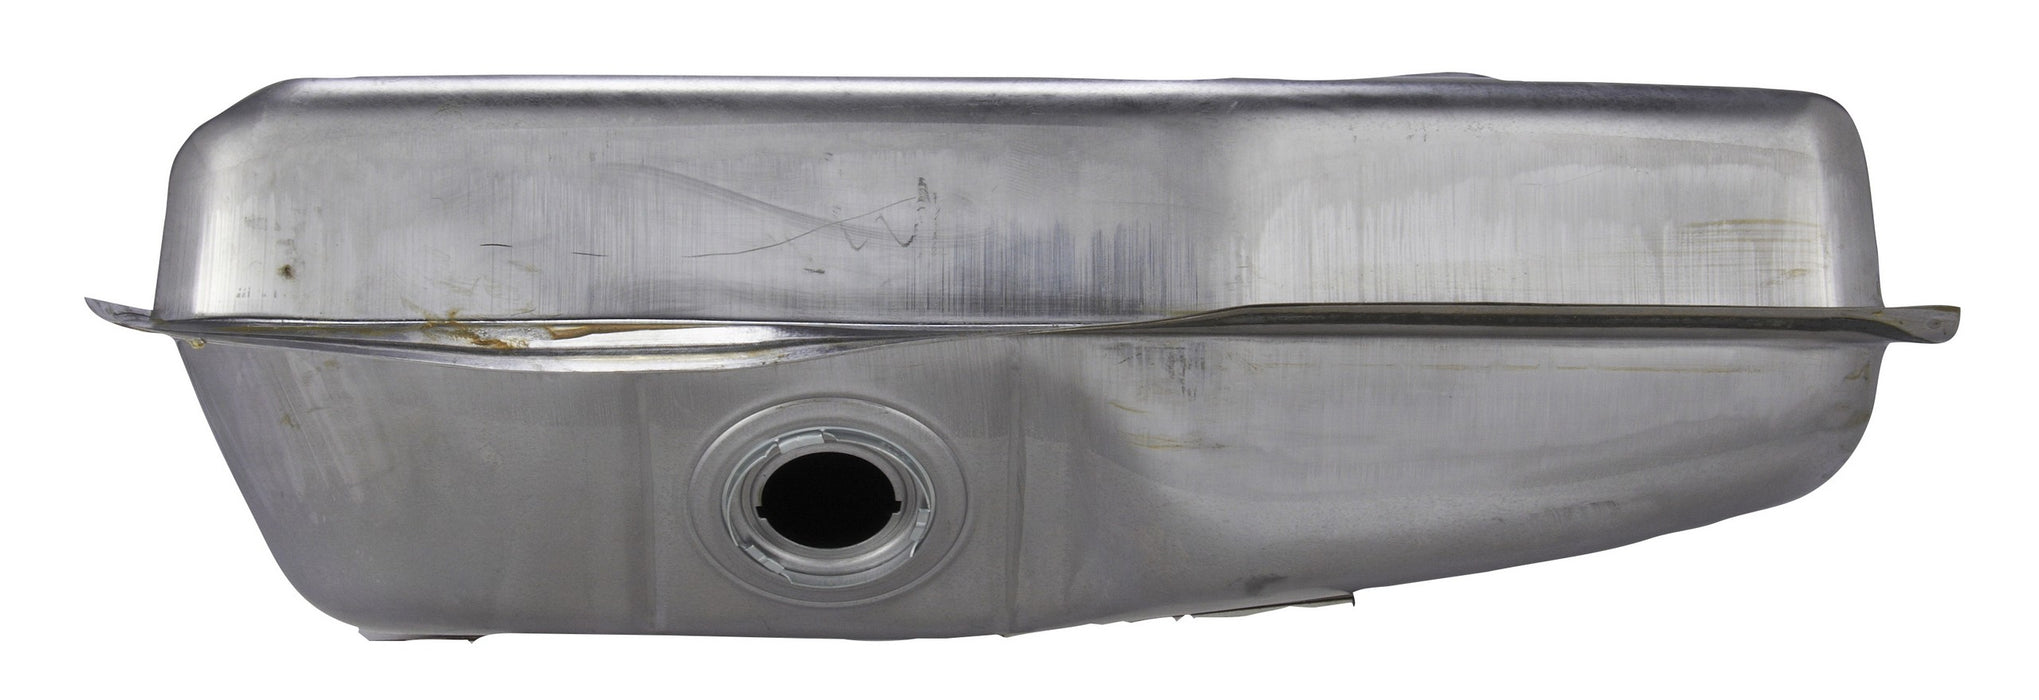 Fuel Tank for Lincoln Versailles 1980 1979 1978 1977 - Spectra F30